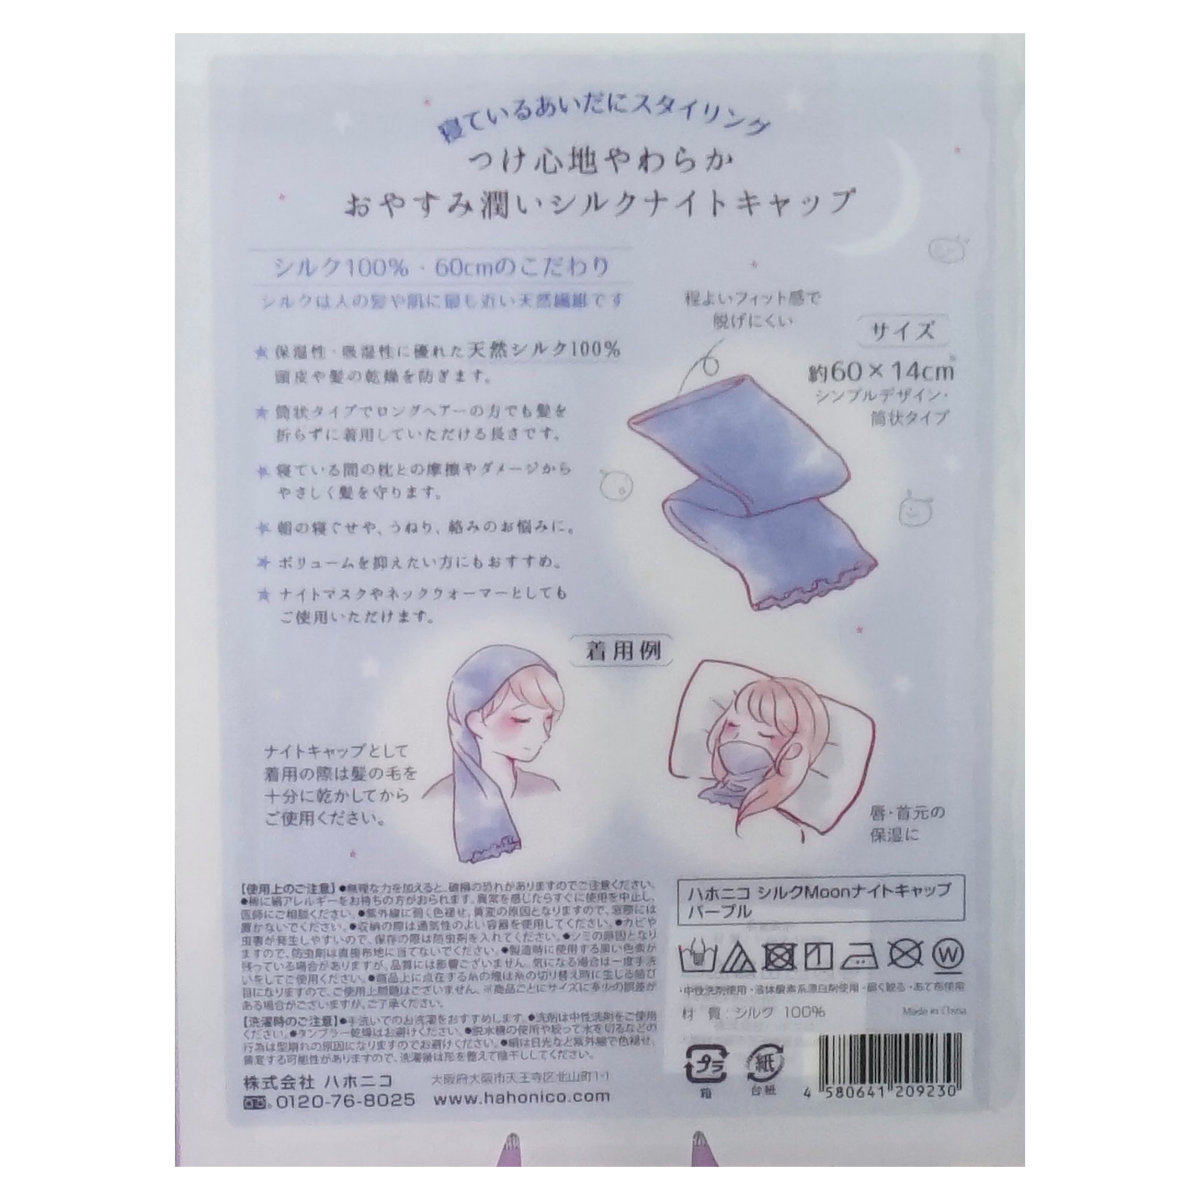 [ coupon ] beauty . san . thought .. therefore. silk moon Night cap purple [ is ho Nico Hahonico][ mail service free shipping ]